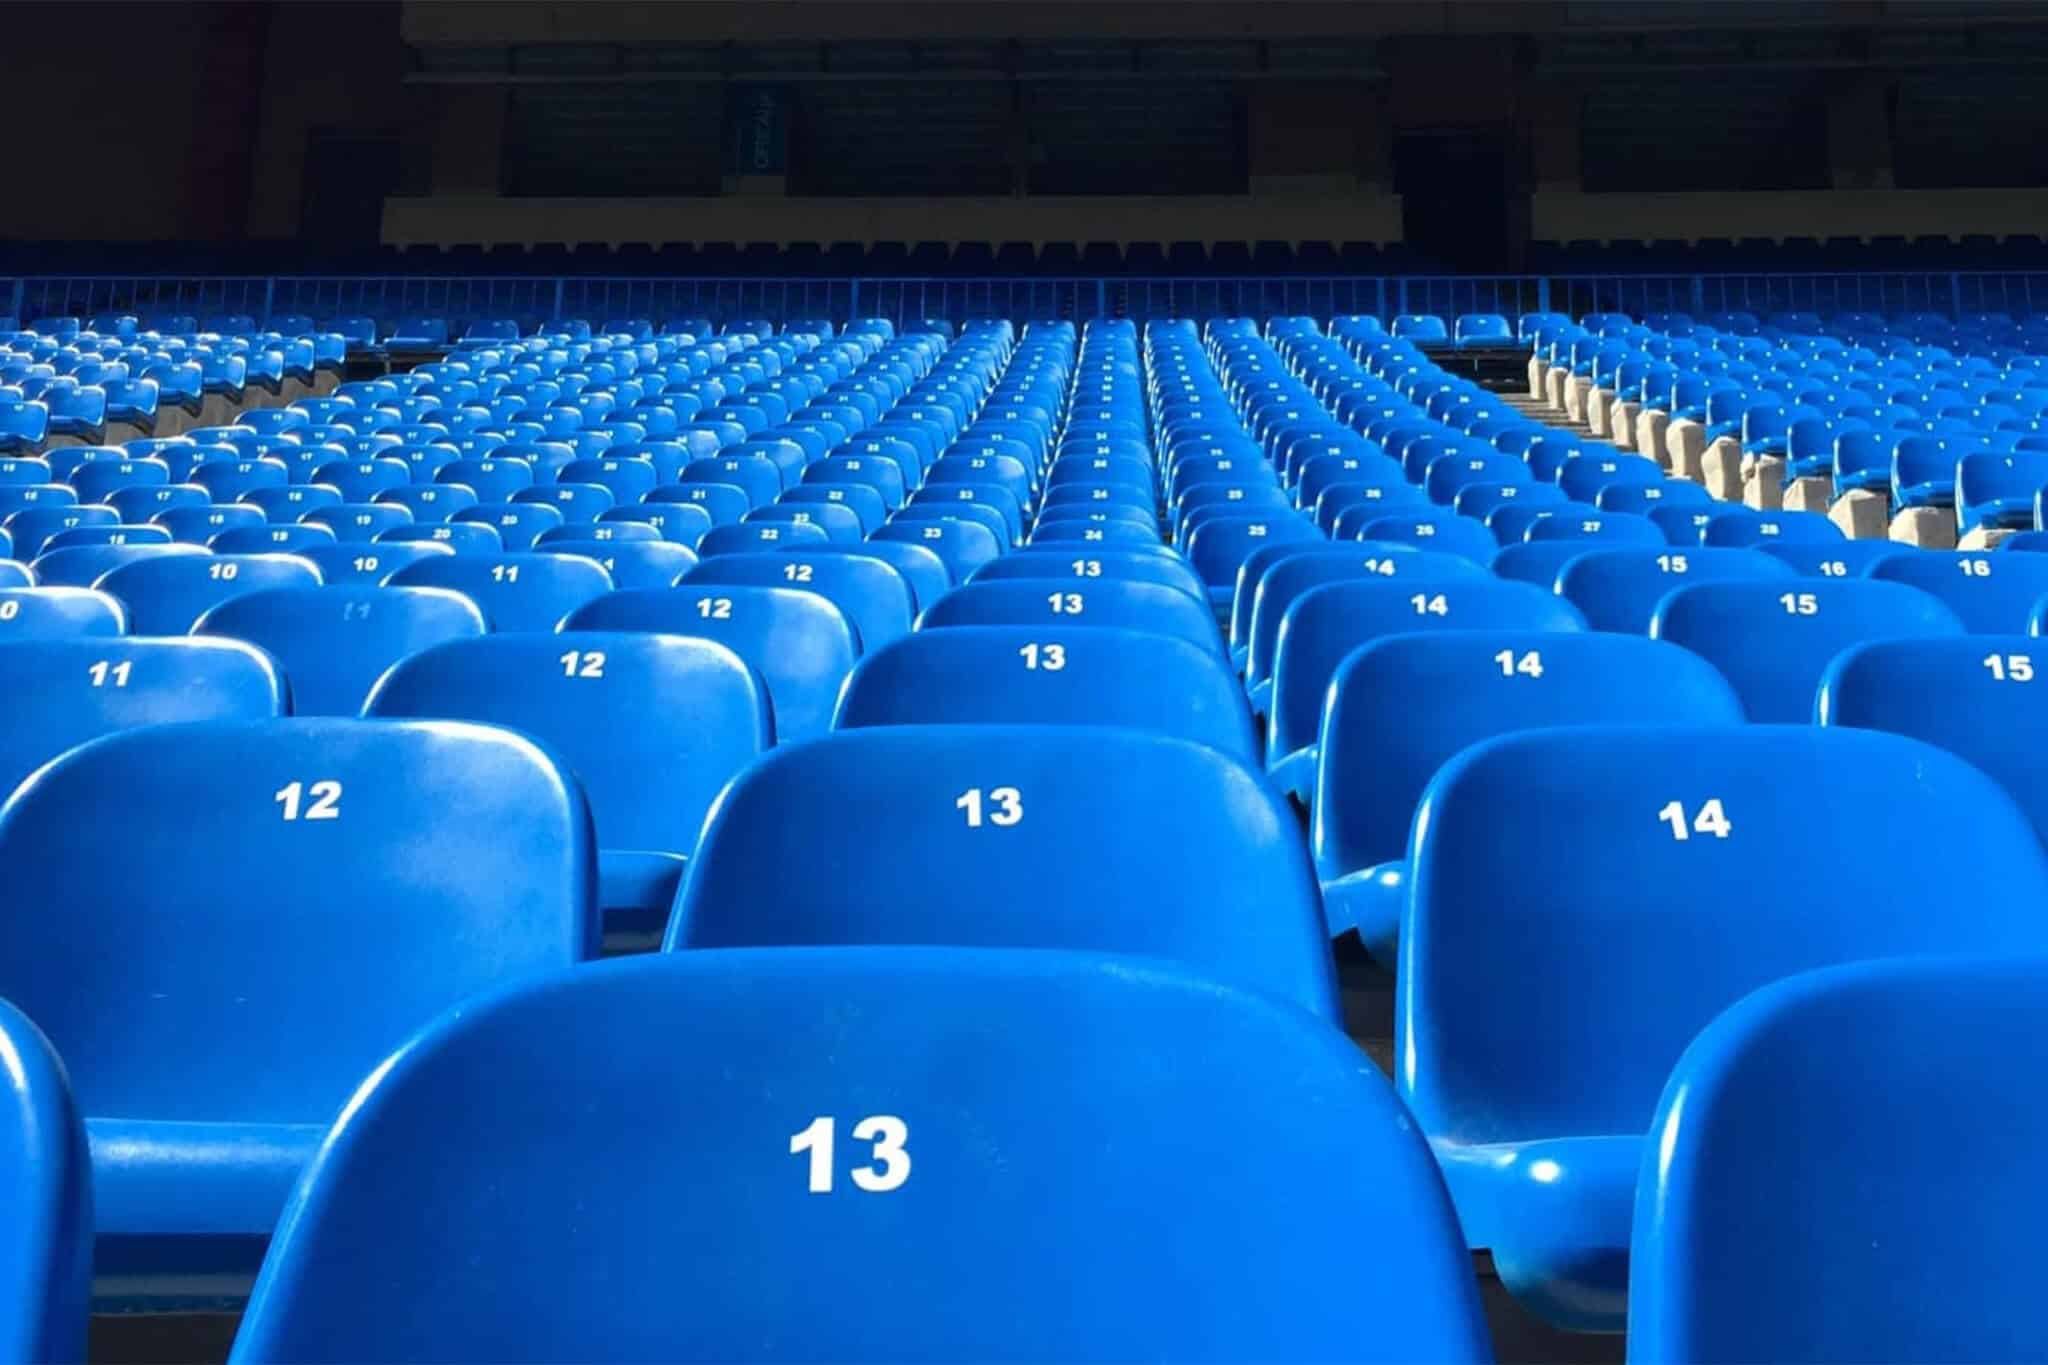 Rows of seats in a stadium.